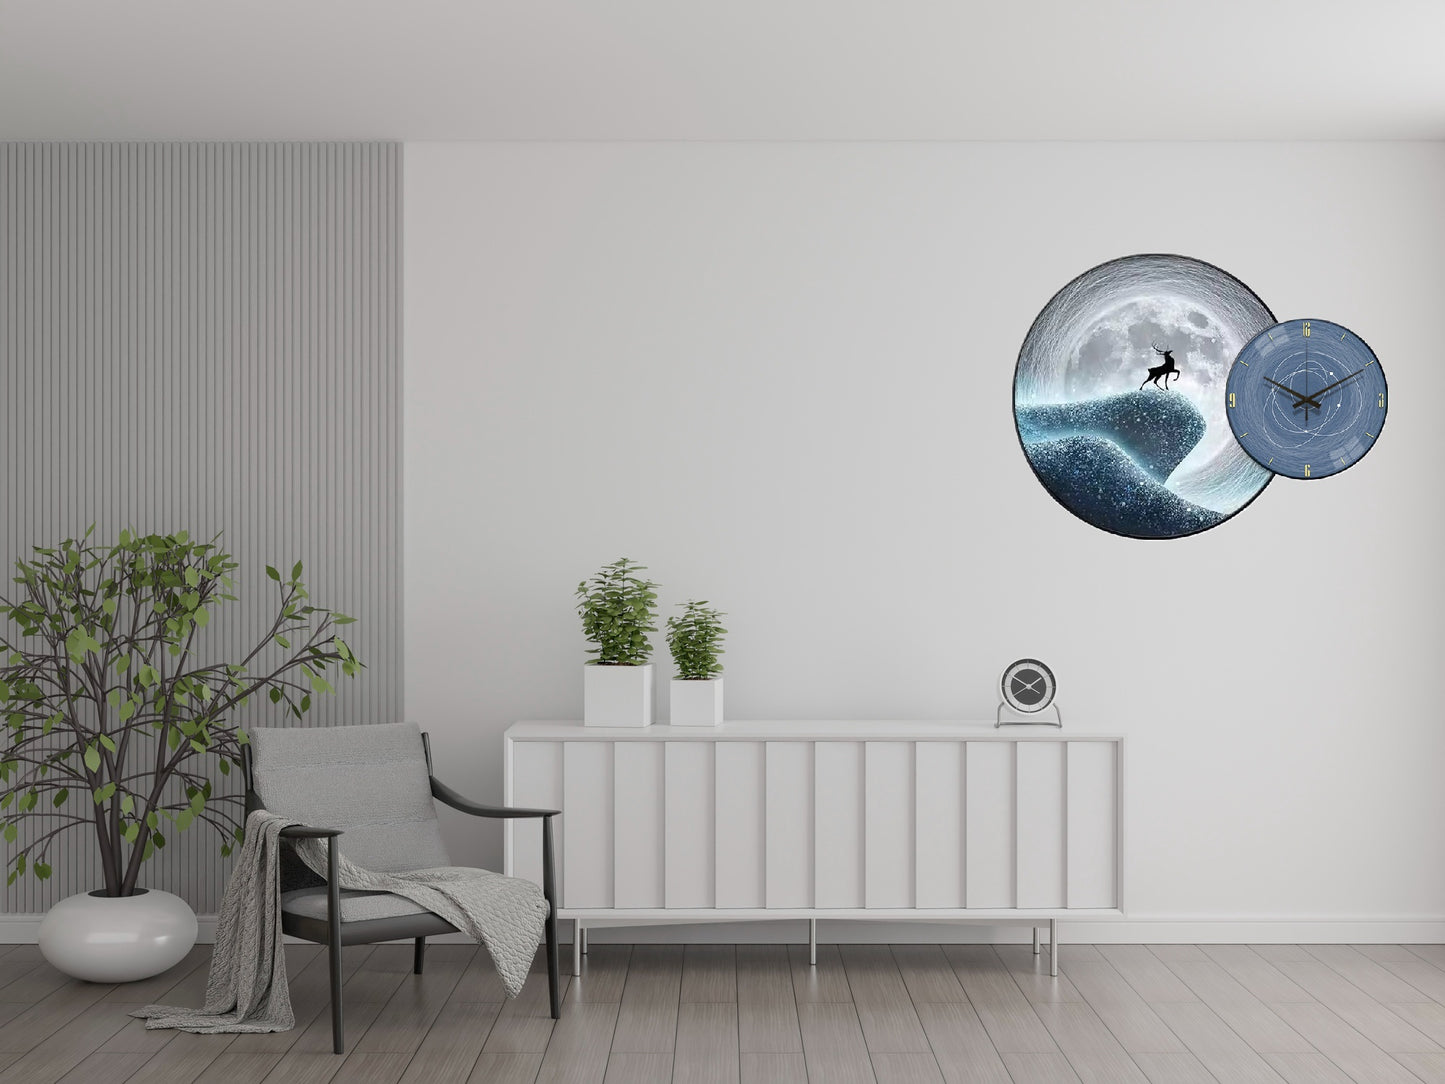 Wall Clock with Painting Moon Round